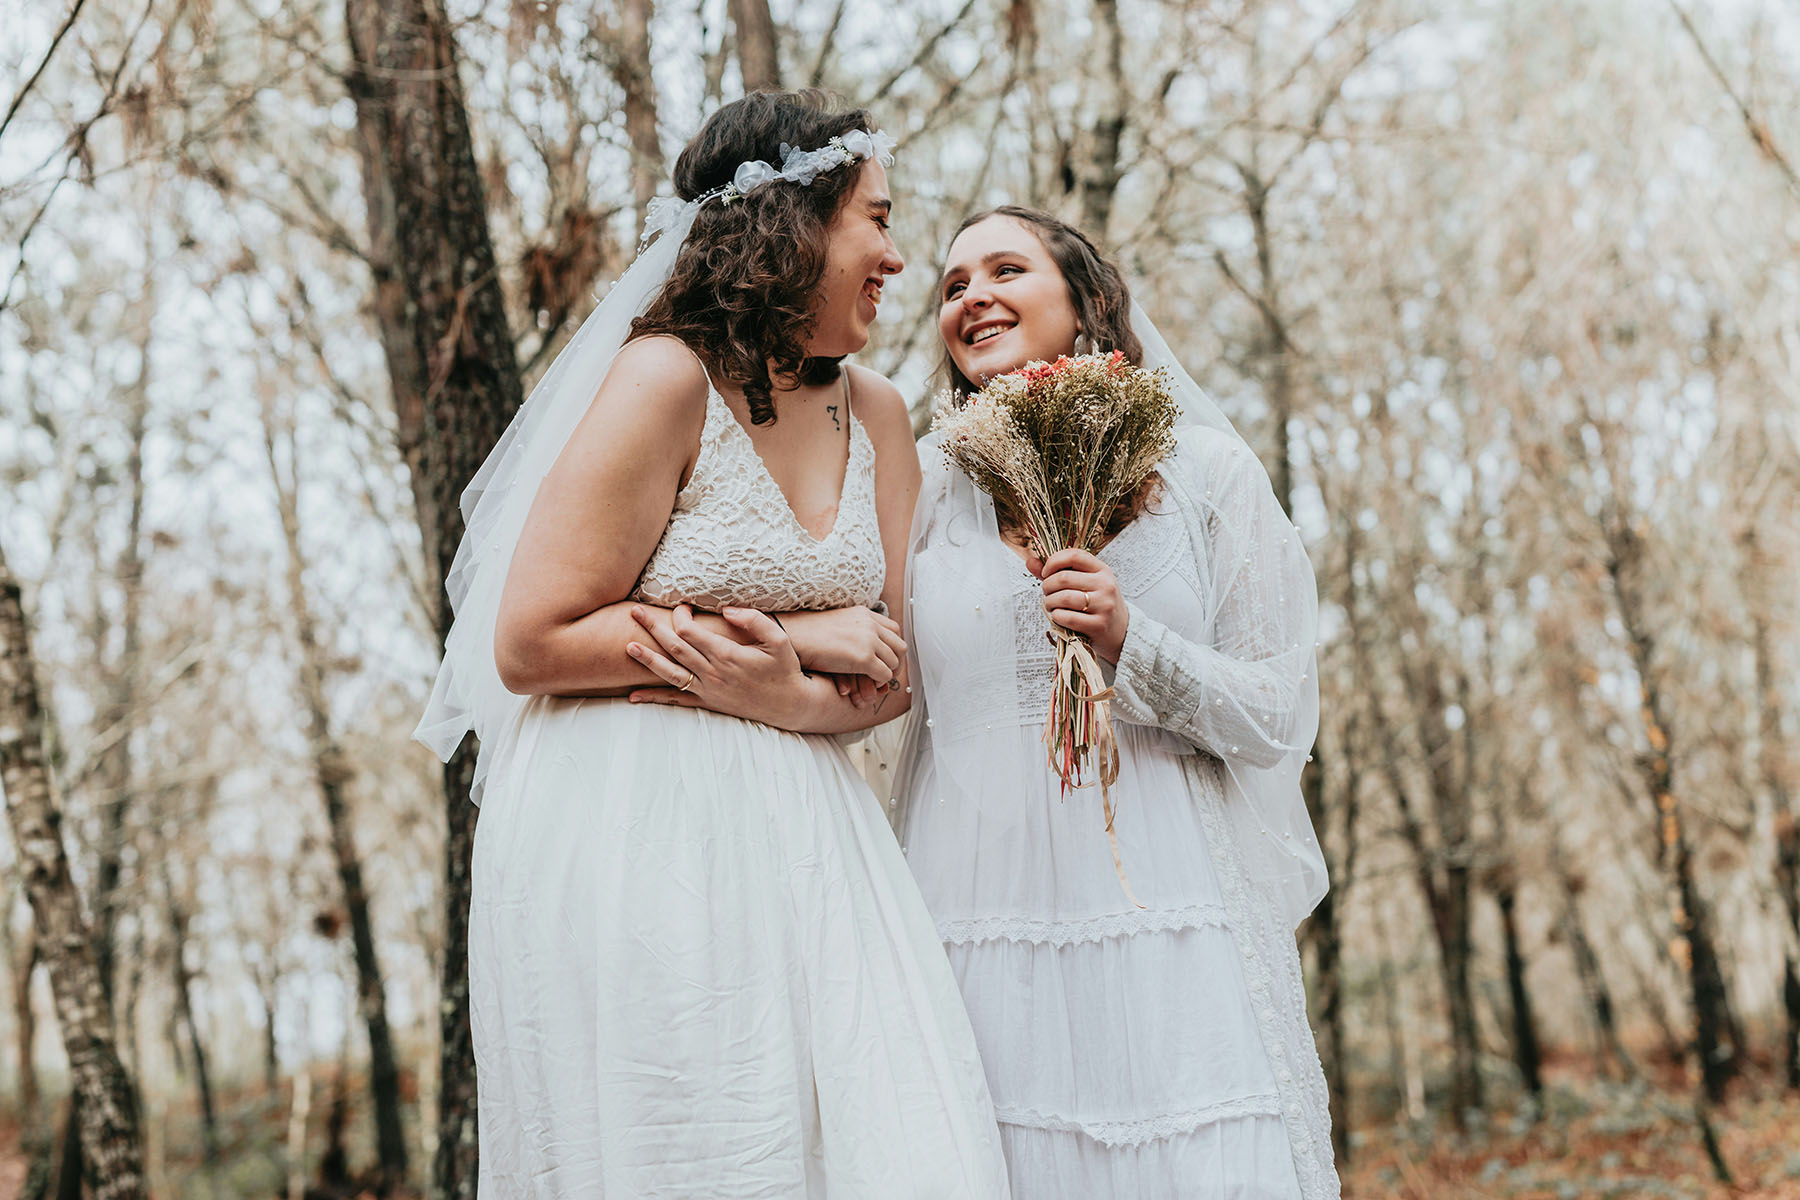 Two brides dressed in white, beaming with happiness. They're having a boho forest wedding.